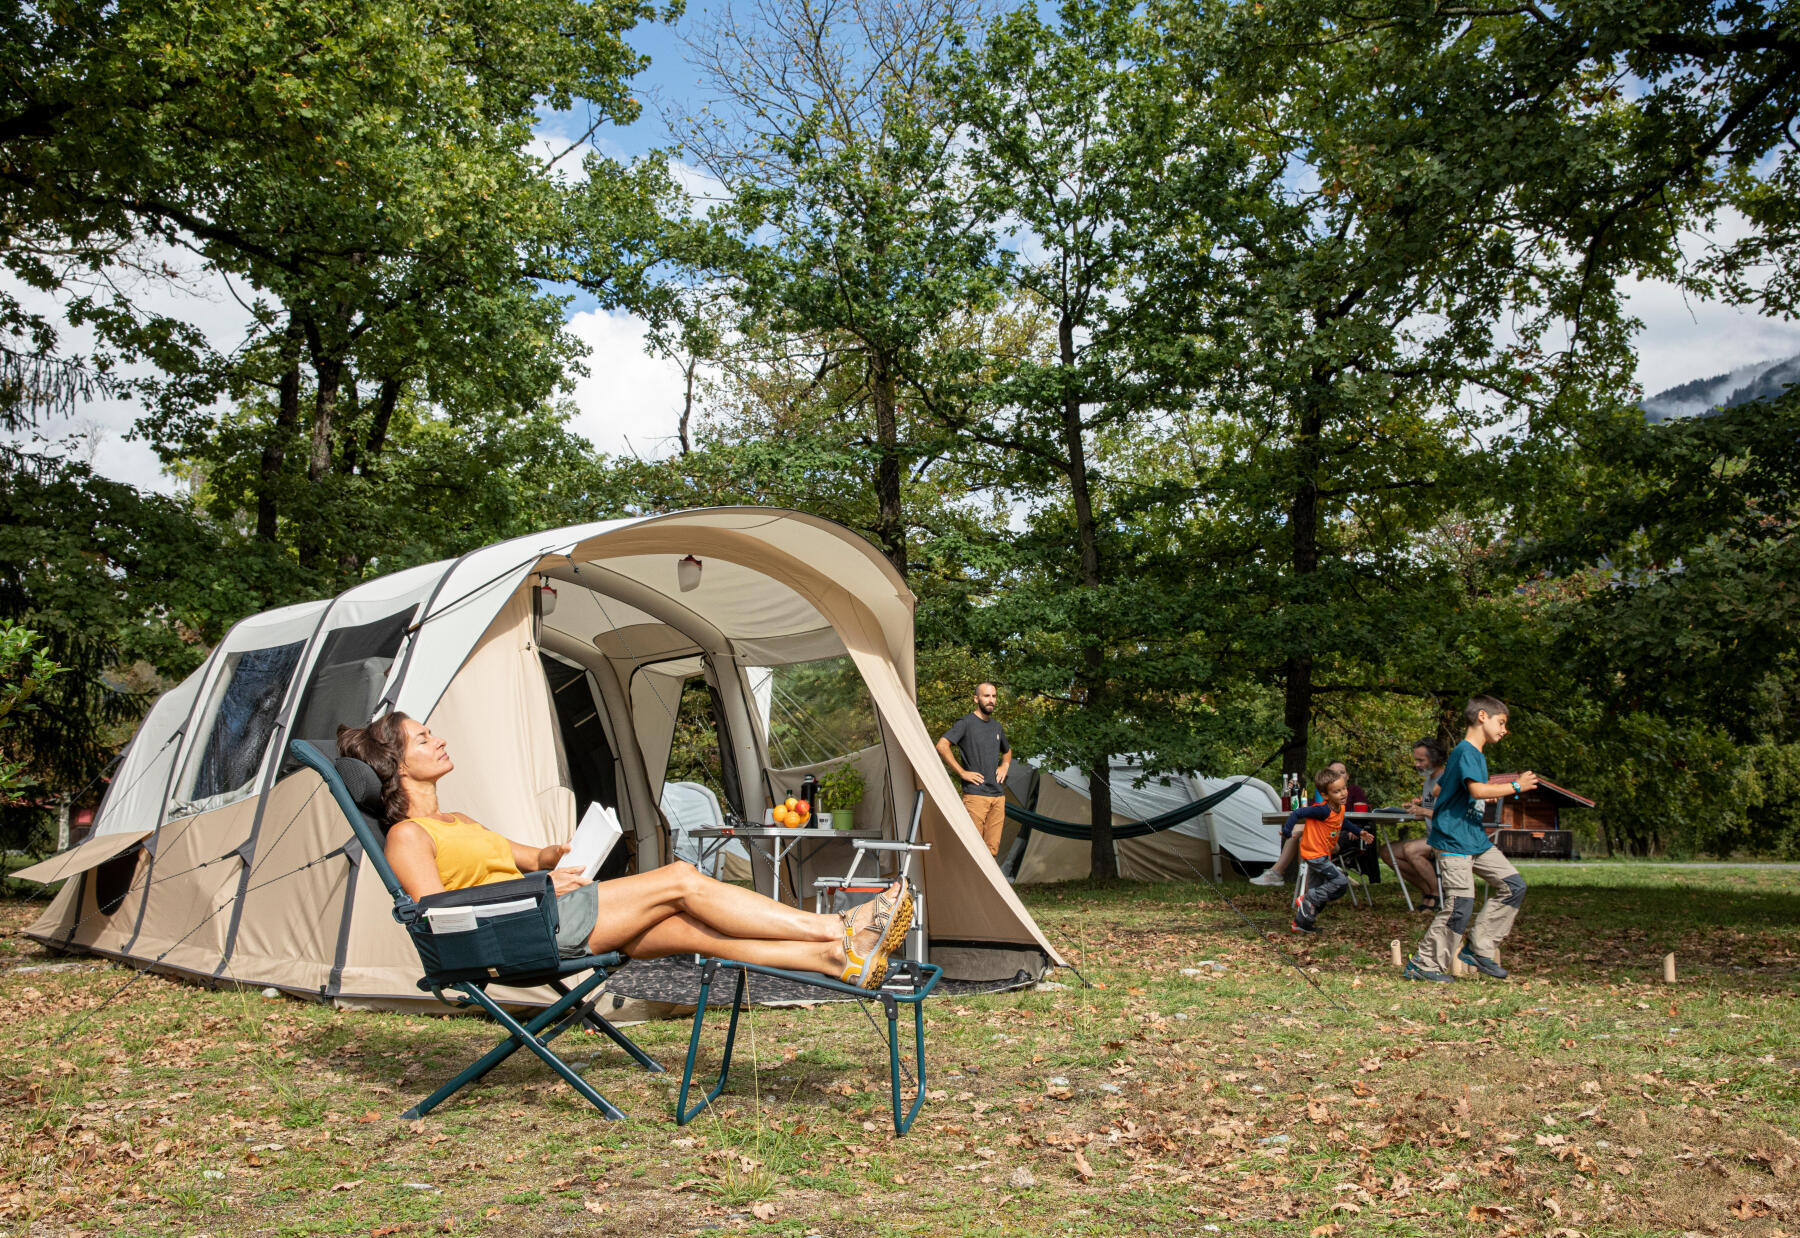 CAMPING COMFORTABLY: OUR TIPS FOR CAMPING LIKE A HOME AWAY FROM HOME